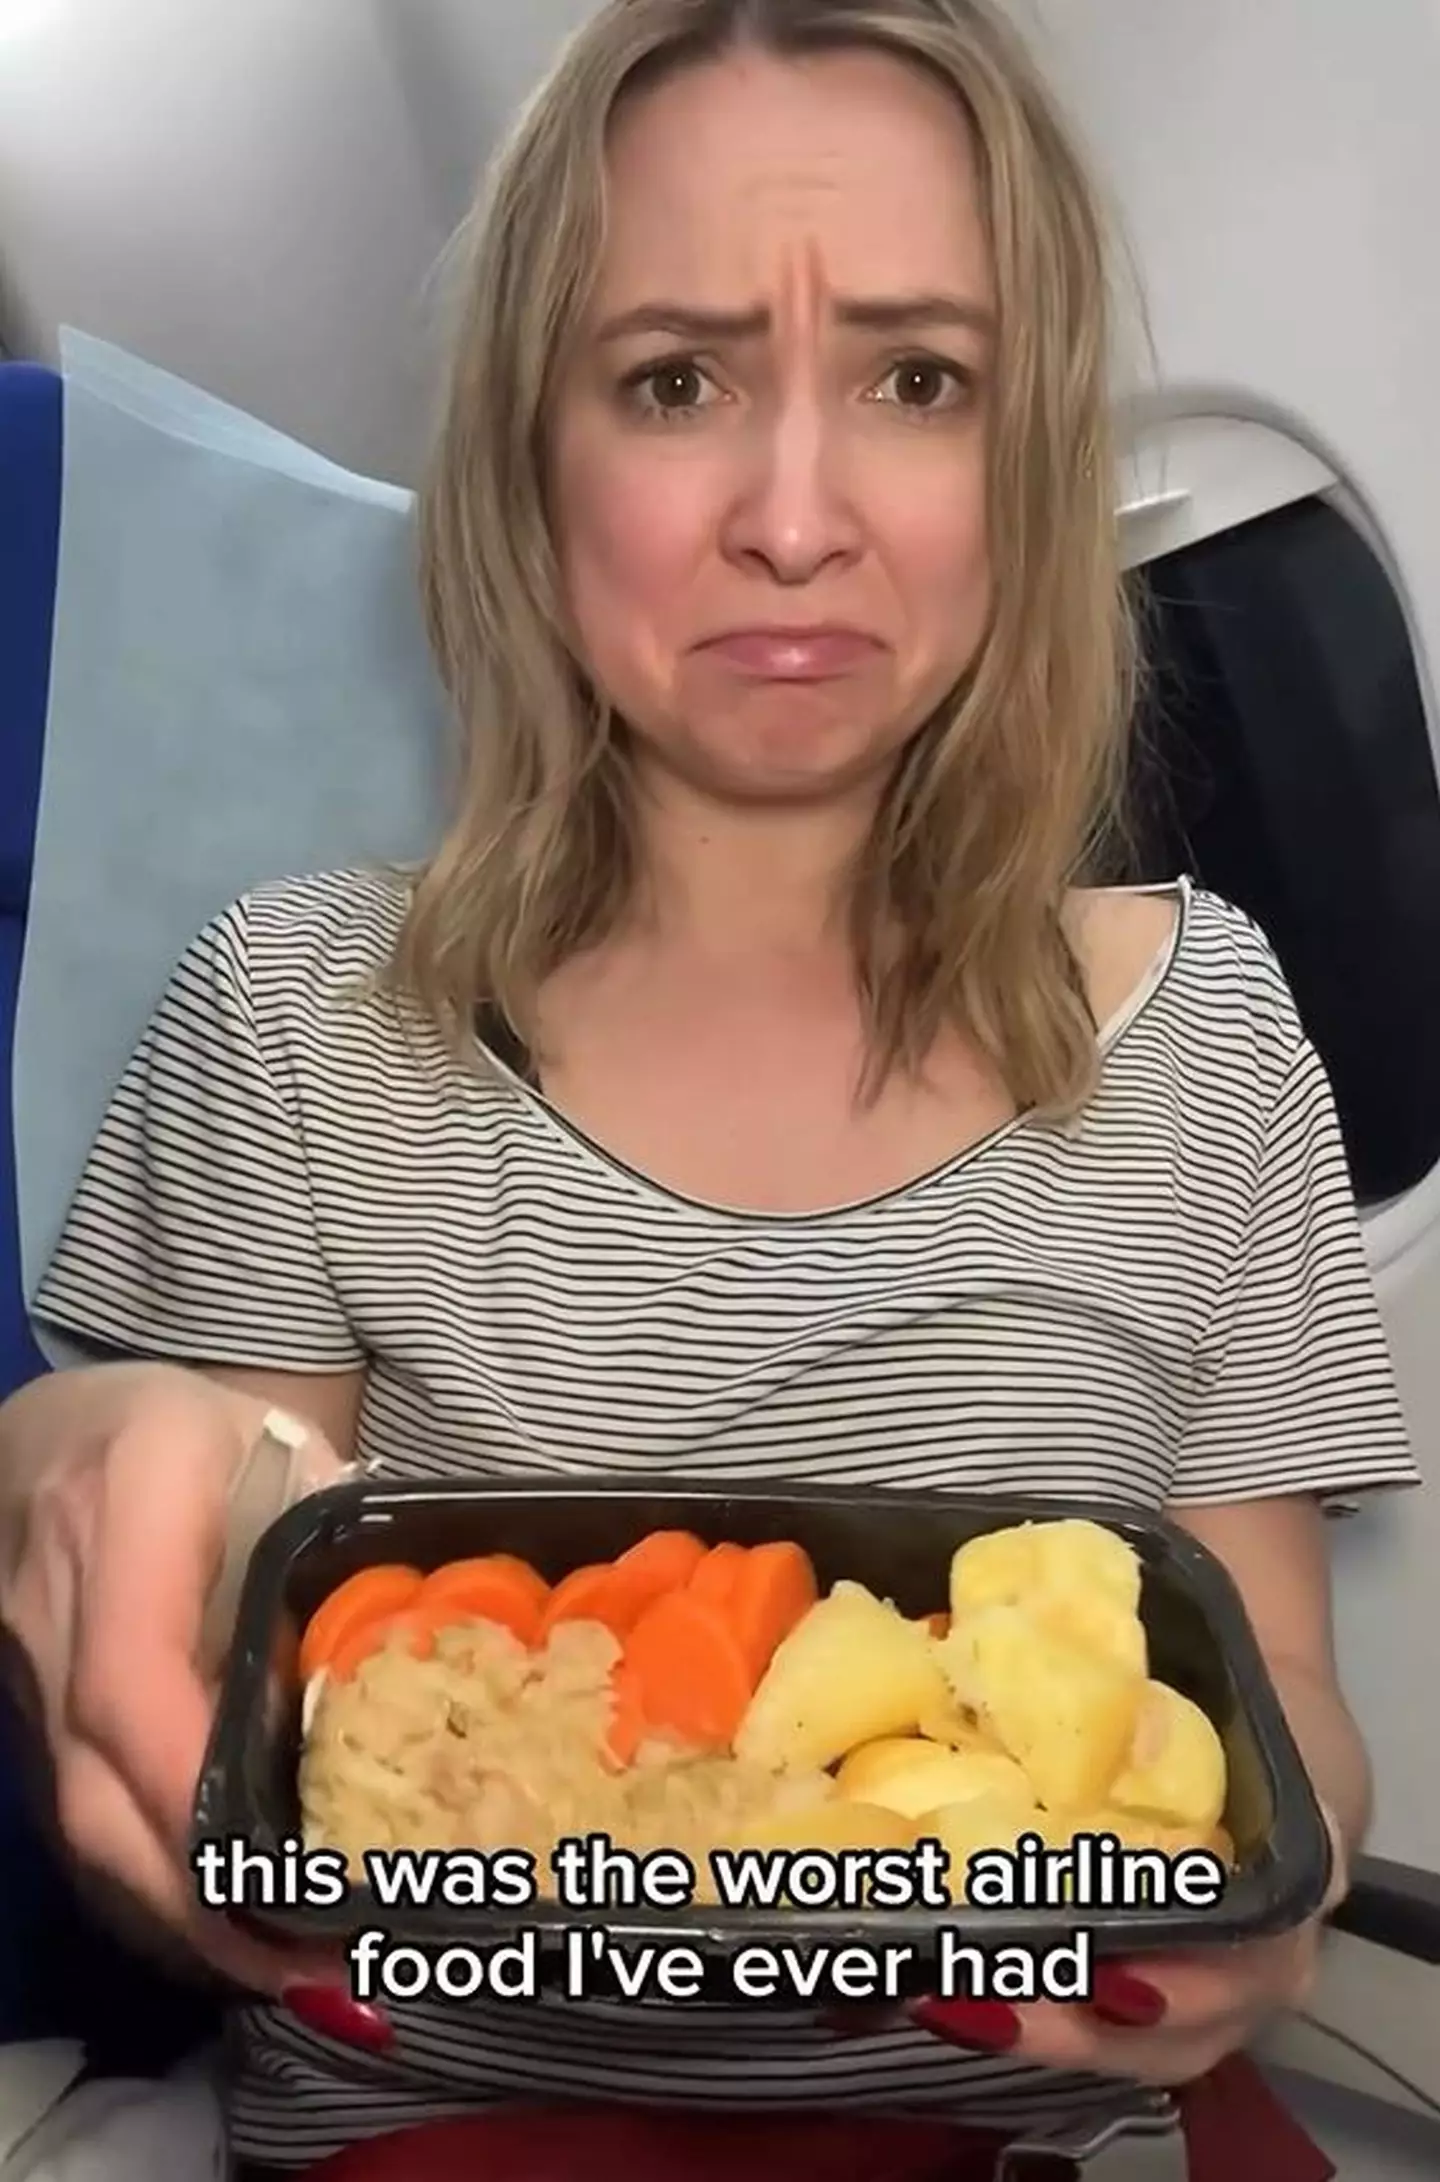 Nicola Easterby wasn't impressed with China Eastern's in-flight menu.